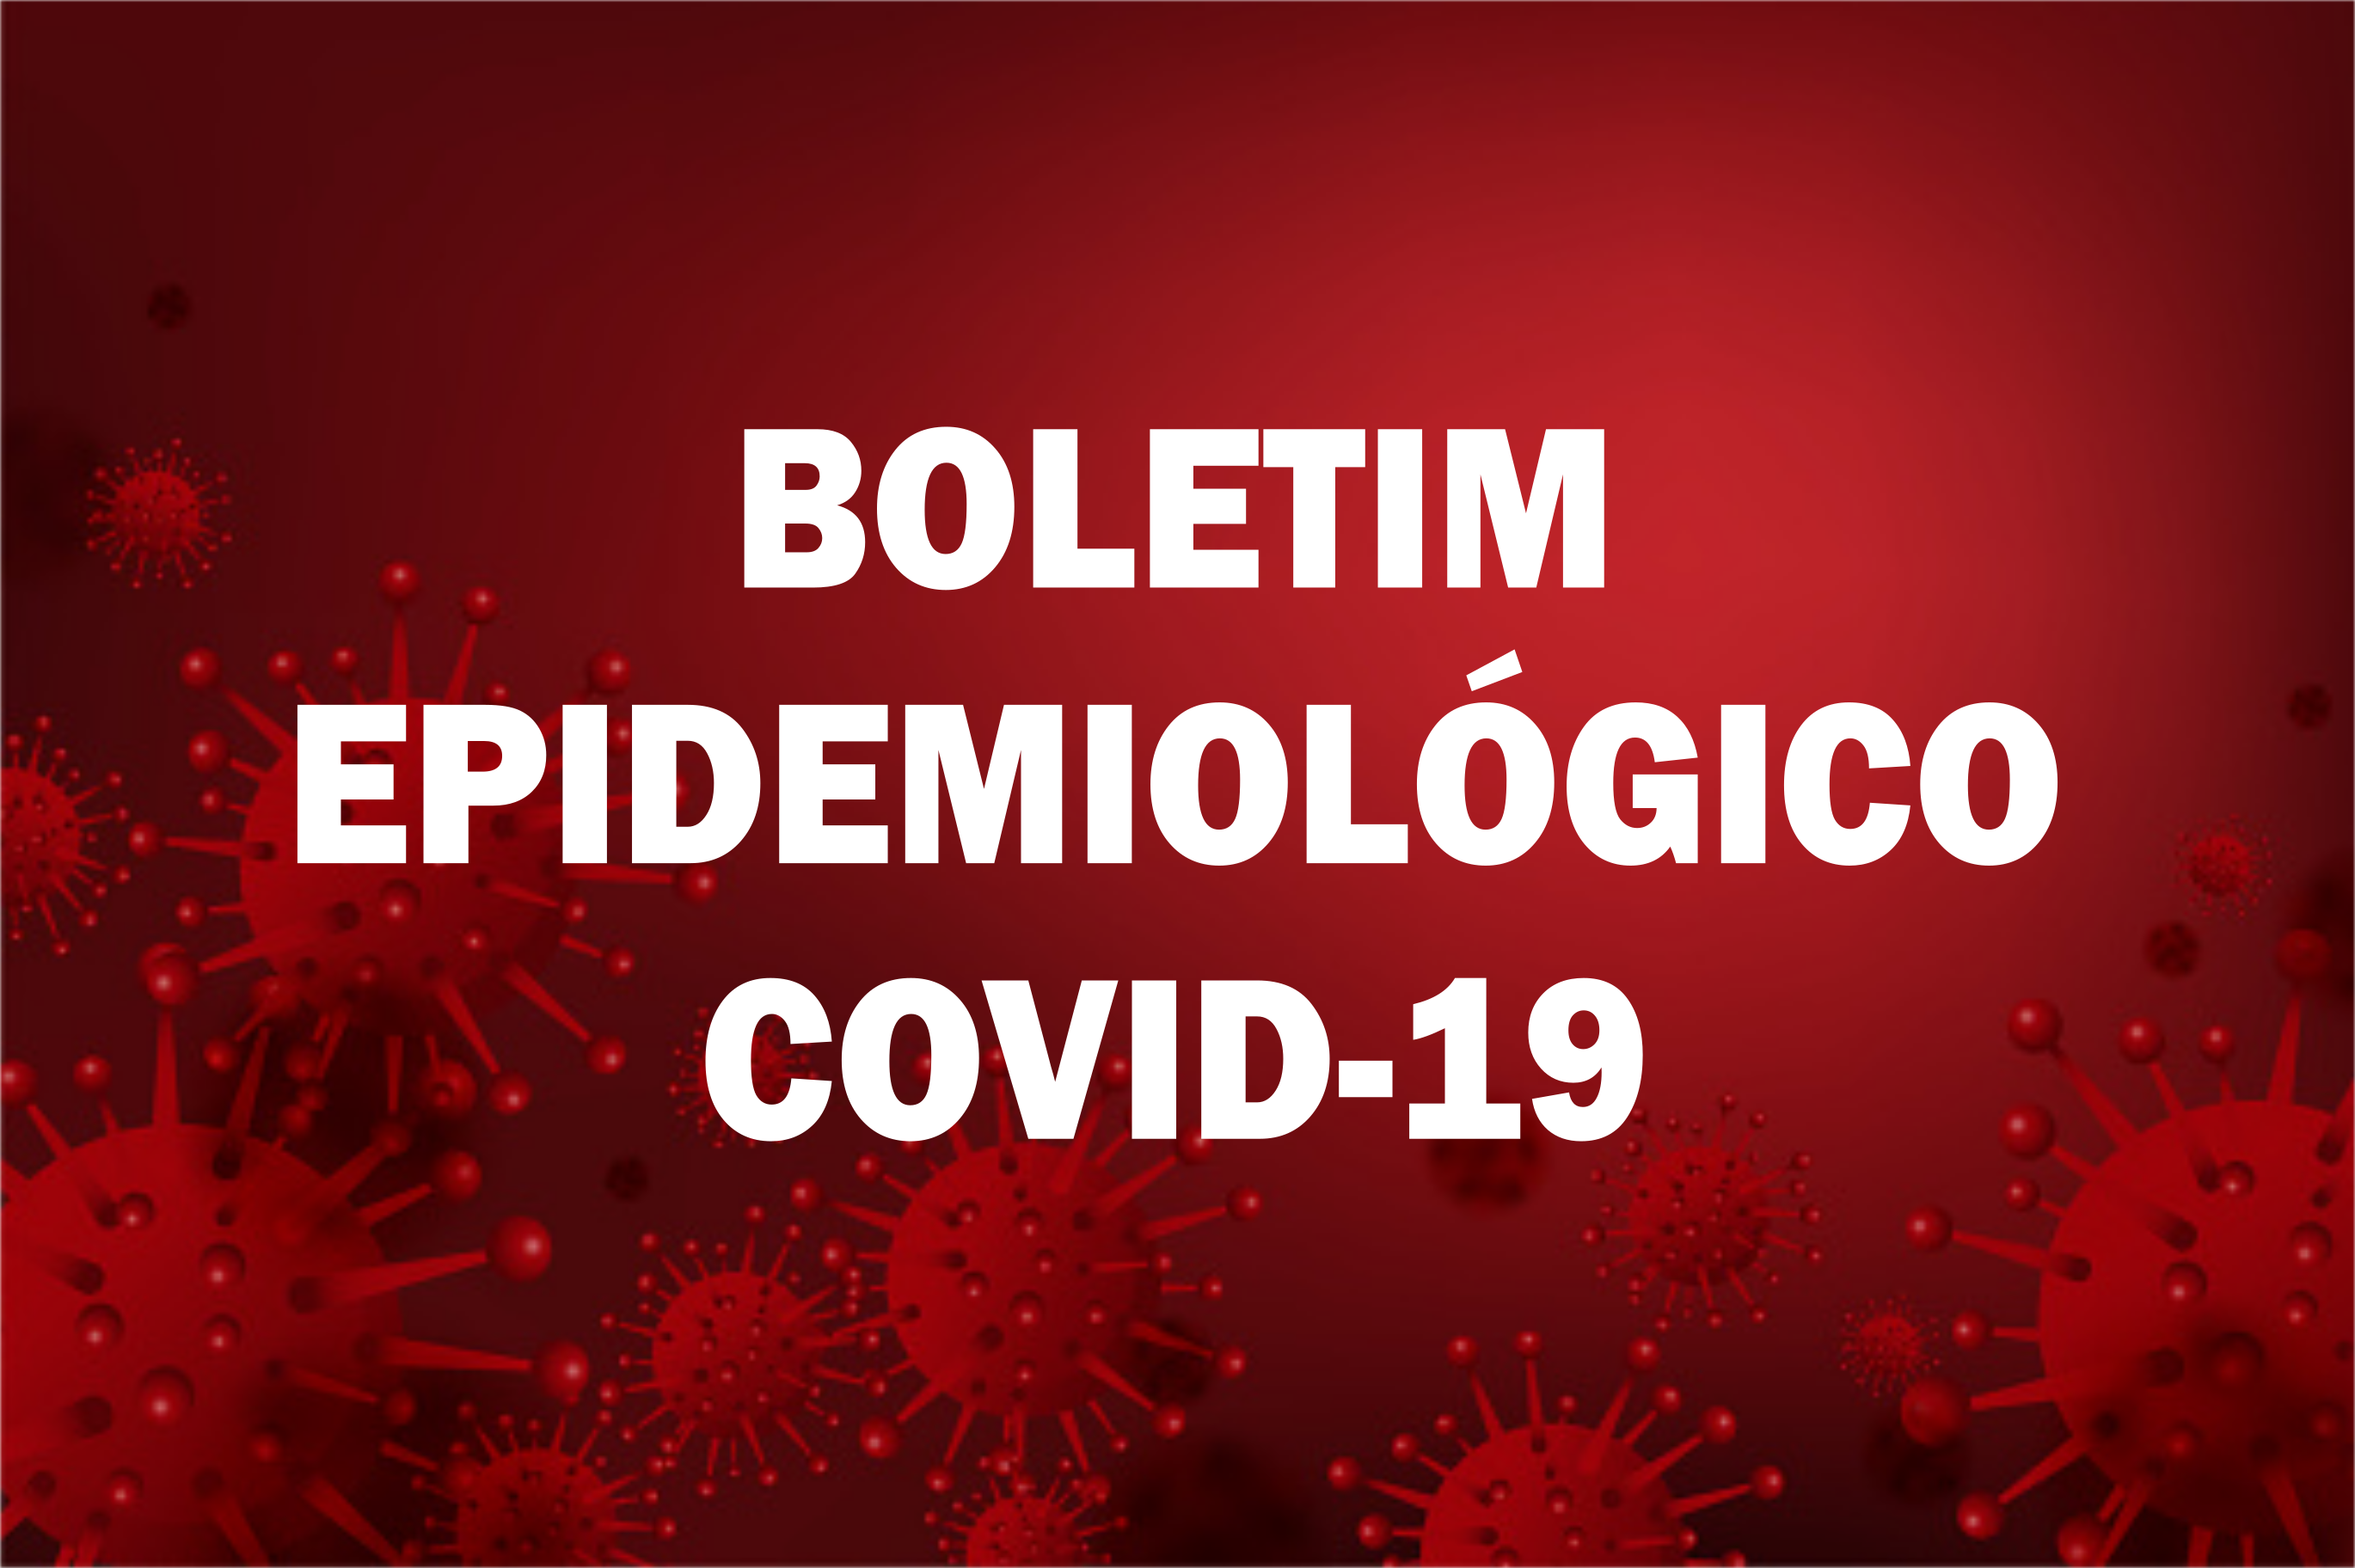 You are currently viewing BOLETIM EPIDEMIOLÓGICO Nº 129 (COVID-19)